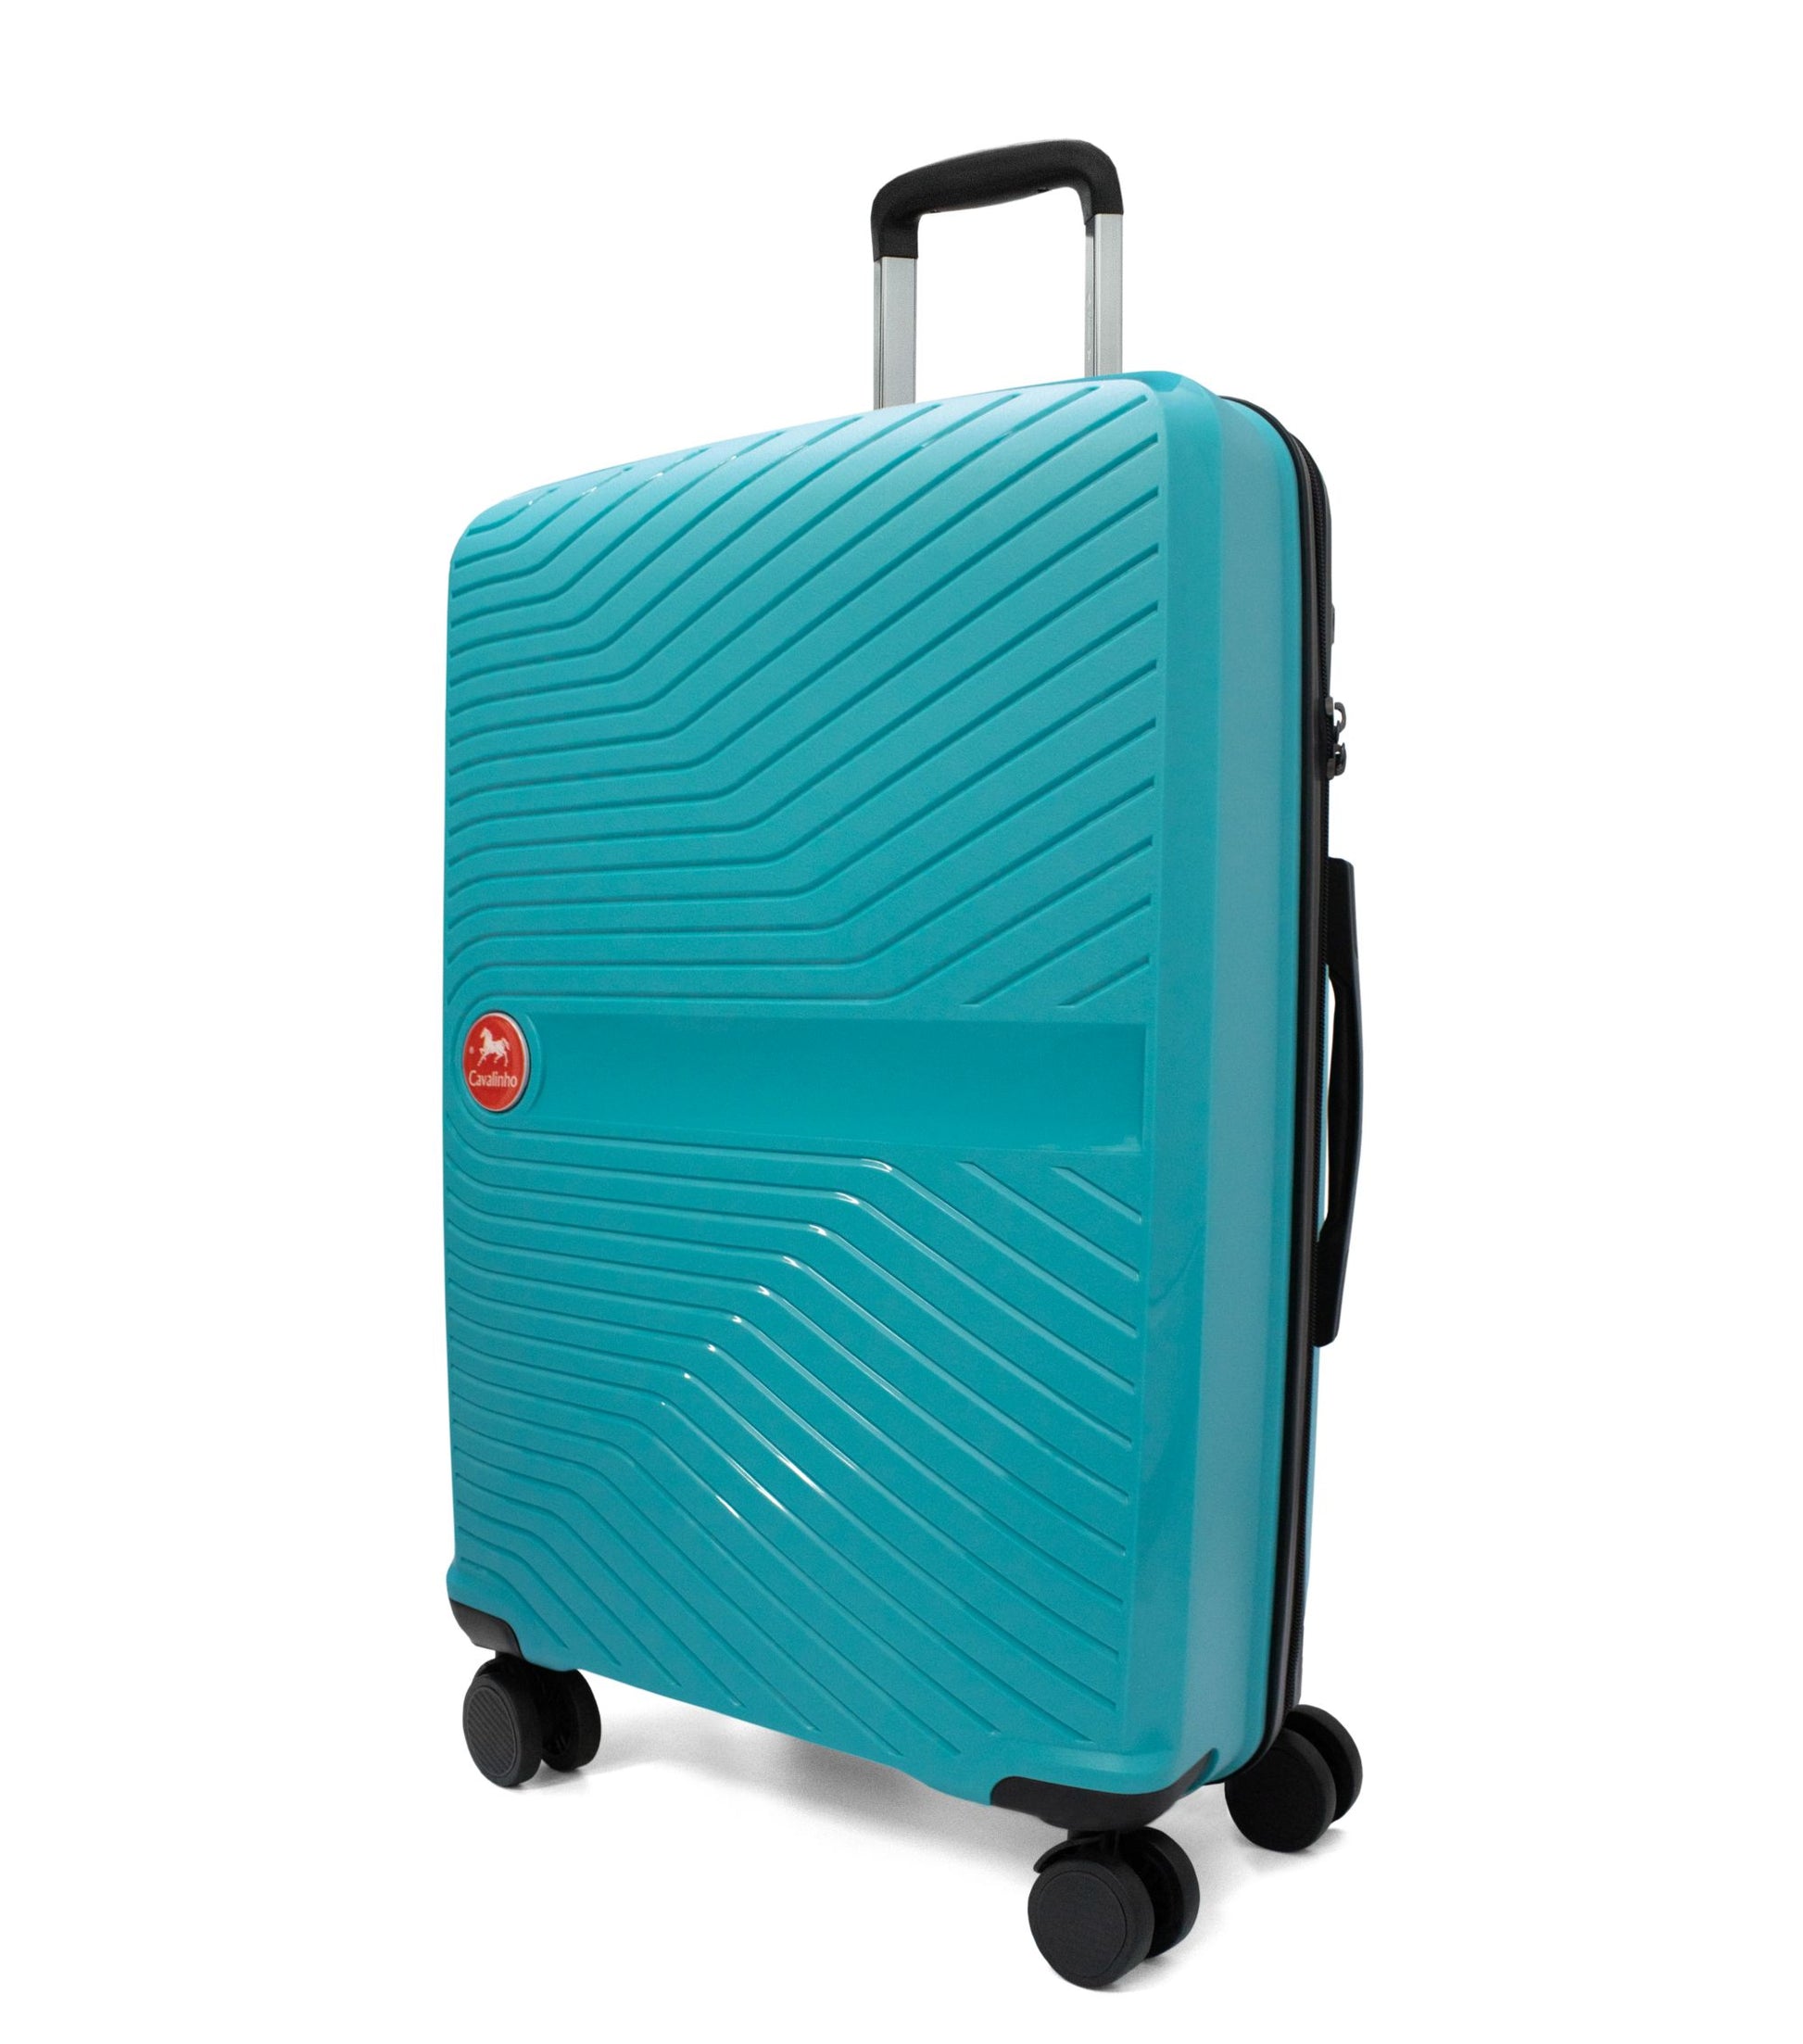 #color_ 24 inch DarkTurquoise | Cavalinho Colorful Check-in Hardside Luggage (24") - 24 inch DarkTurquoise - 68020004.25.24_2